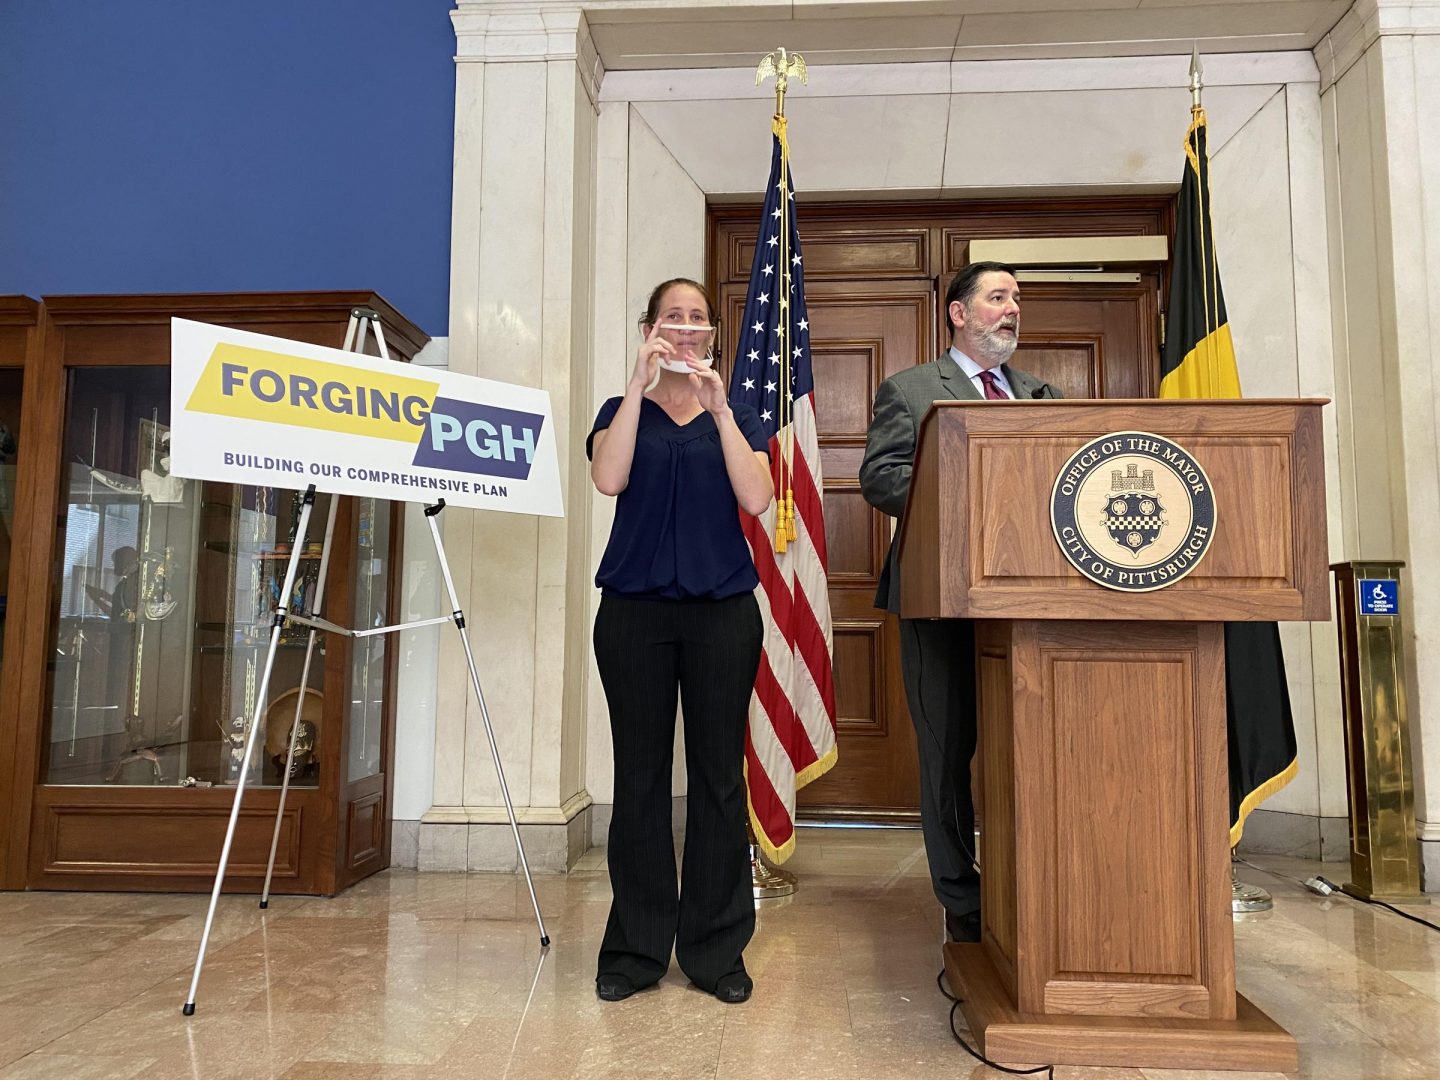 Mayor Bill Peduto discusses ForgingPGH, the city’s new land-use planning initiative, during a press conference on Tuesday, Sept. 1, 2020.